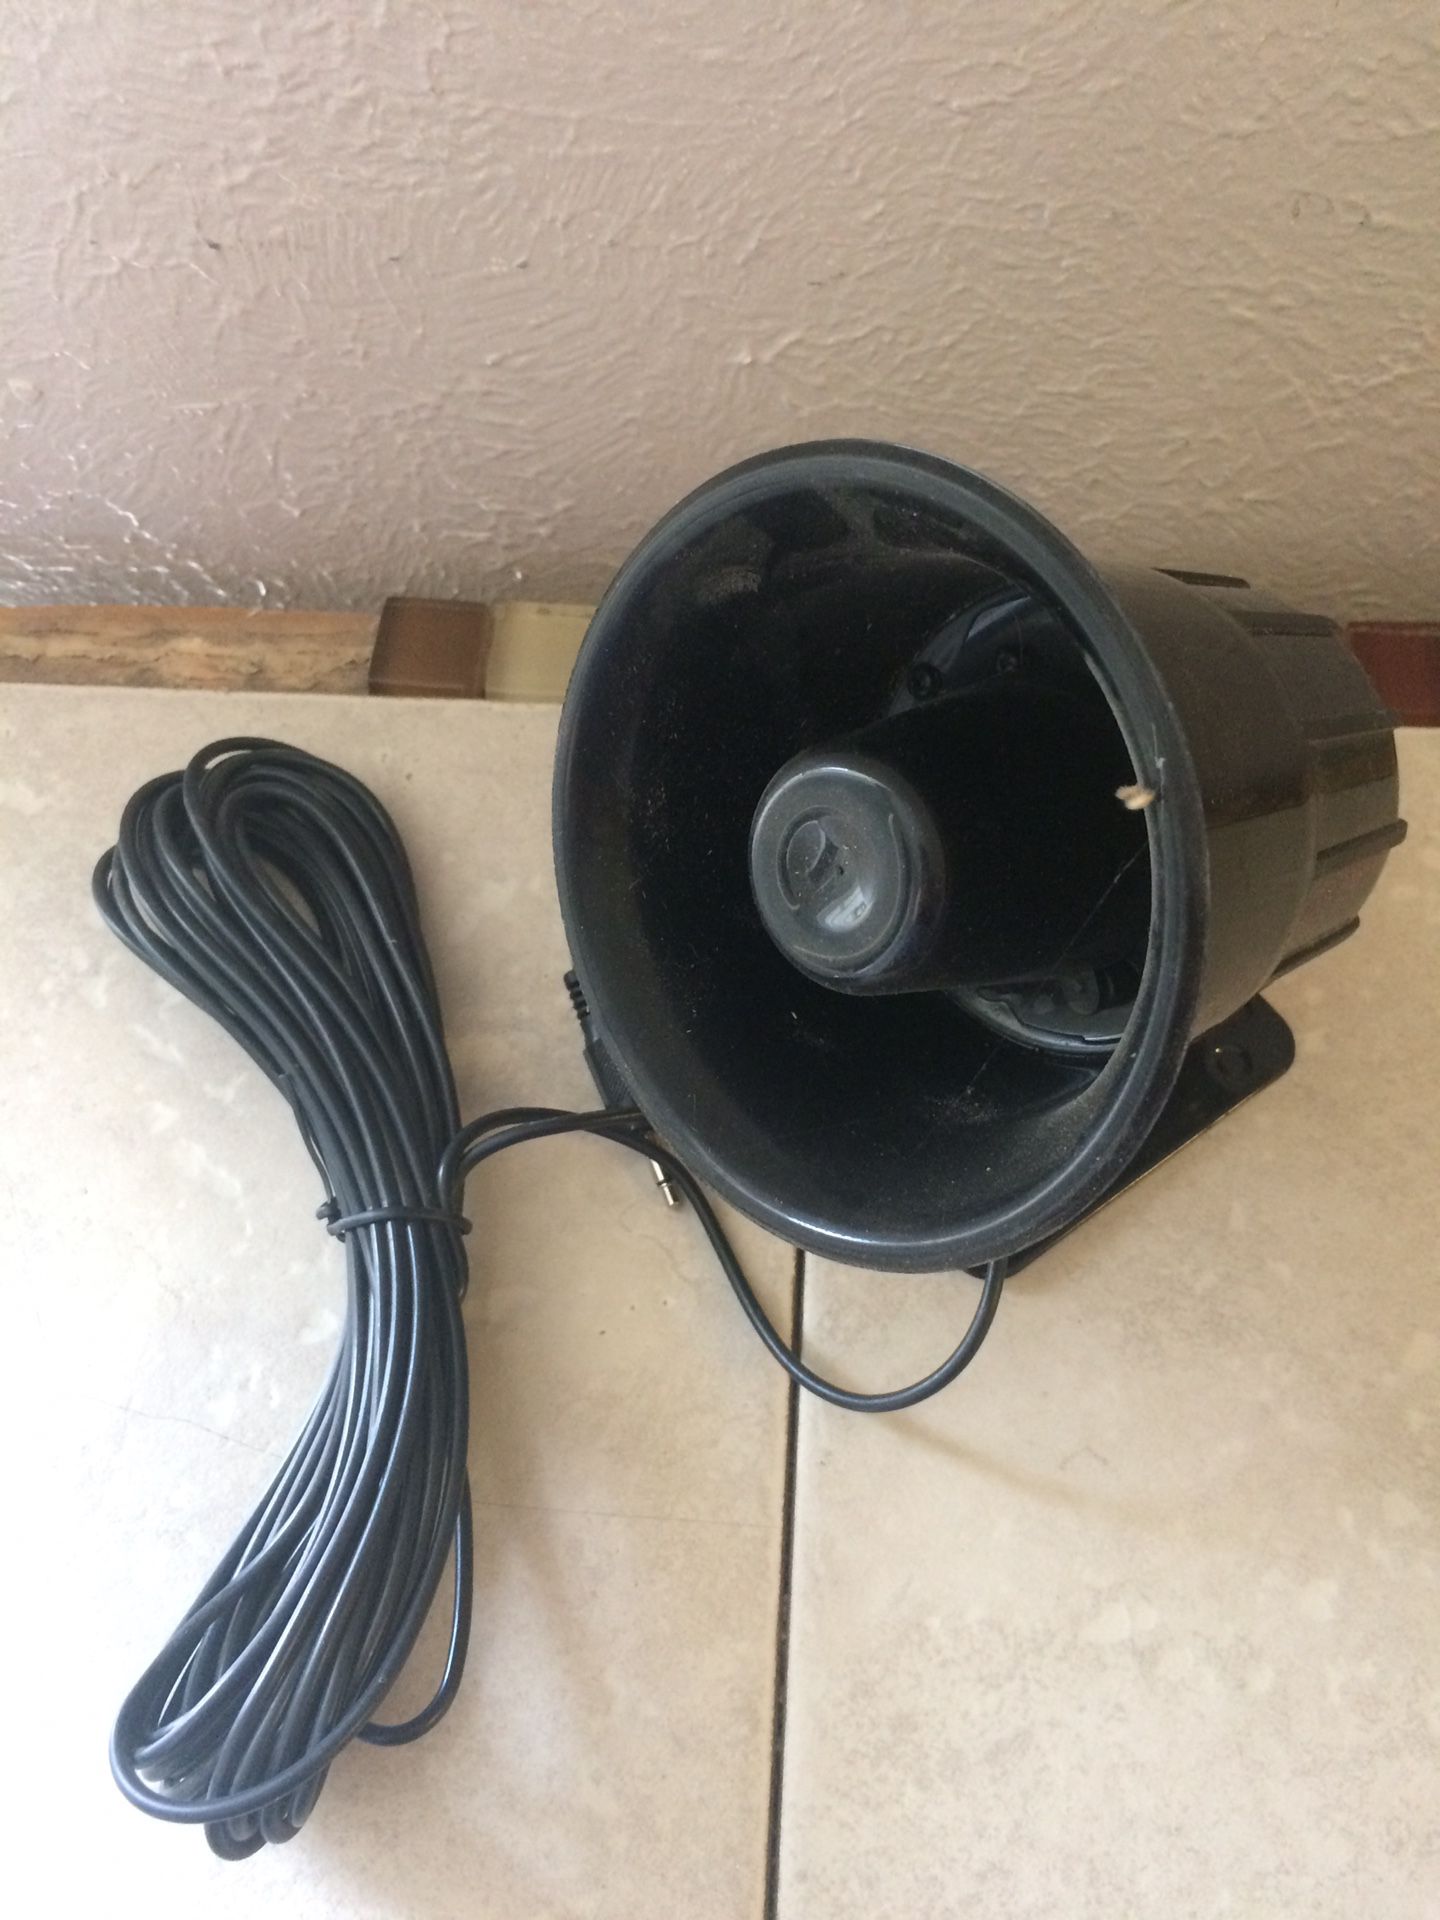 External speaker for a PA system